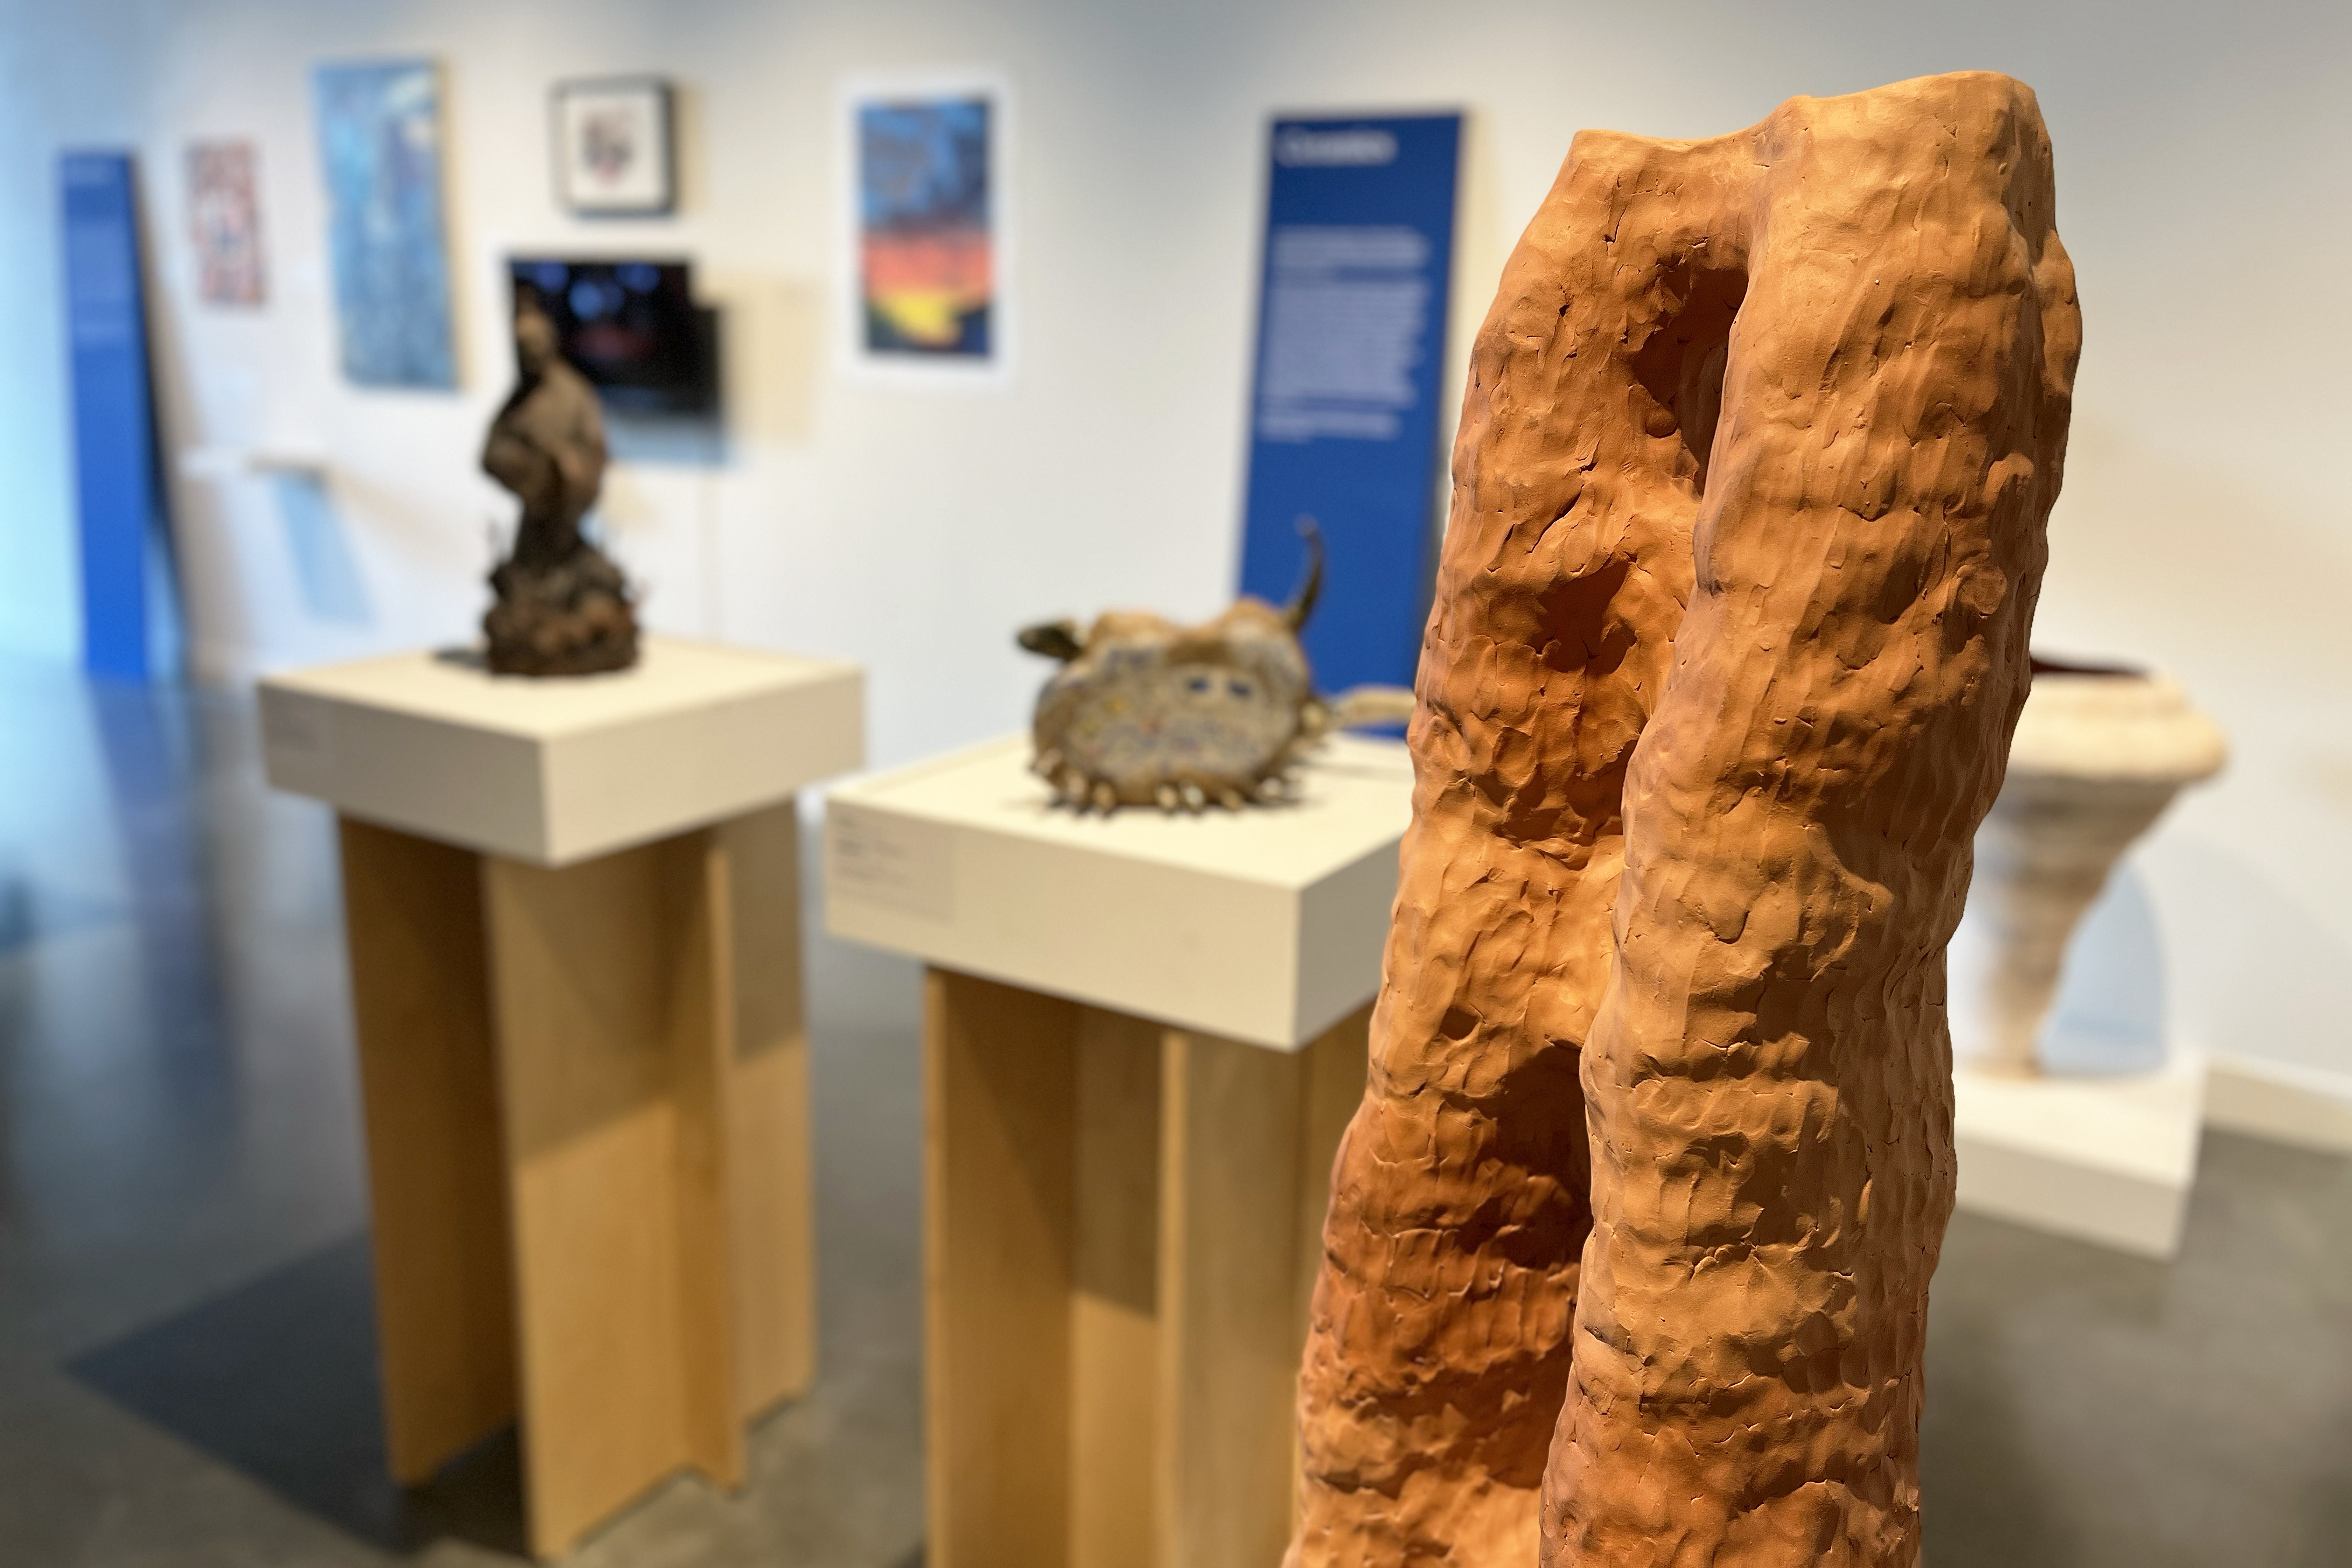 ceramics work on view including a terra cotta piece that resembles a desert rock formation